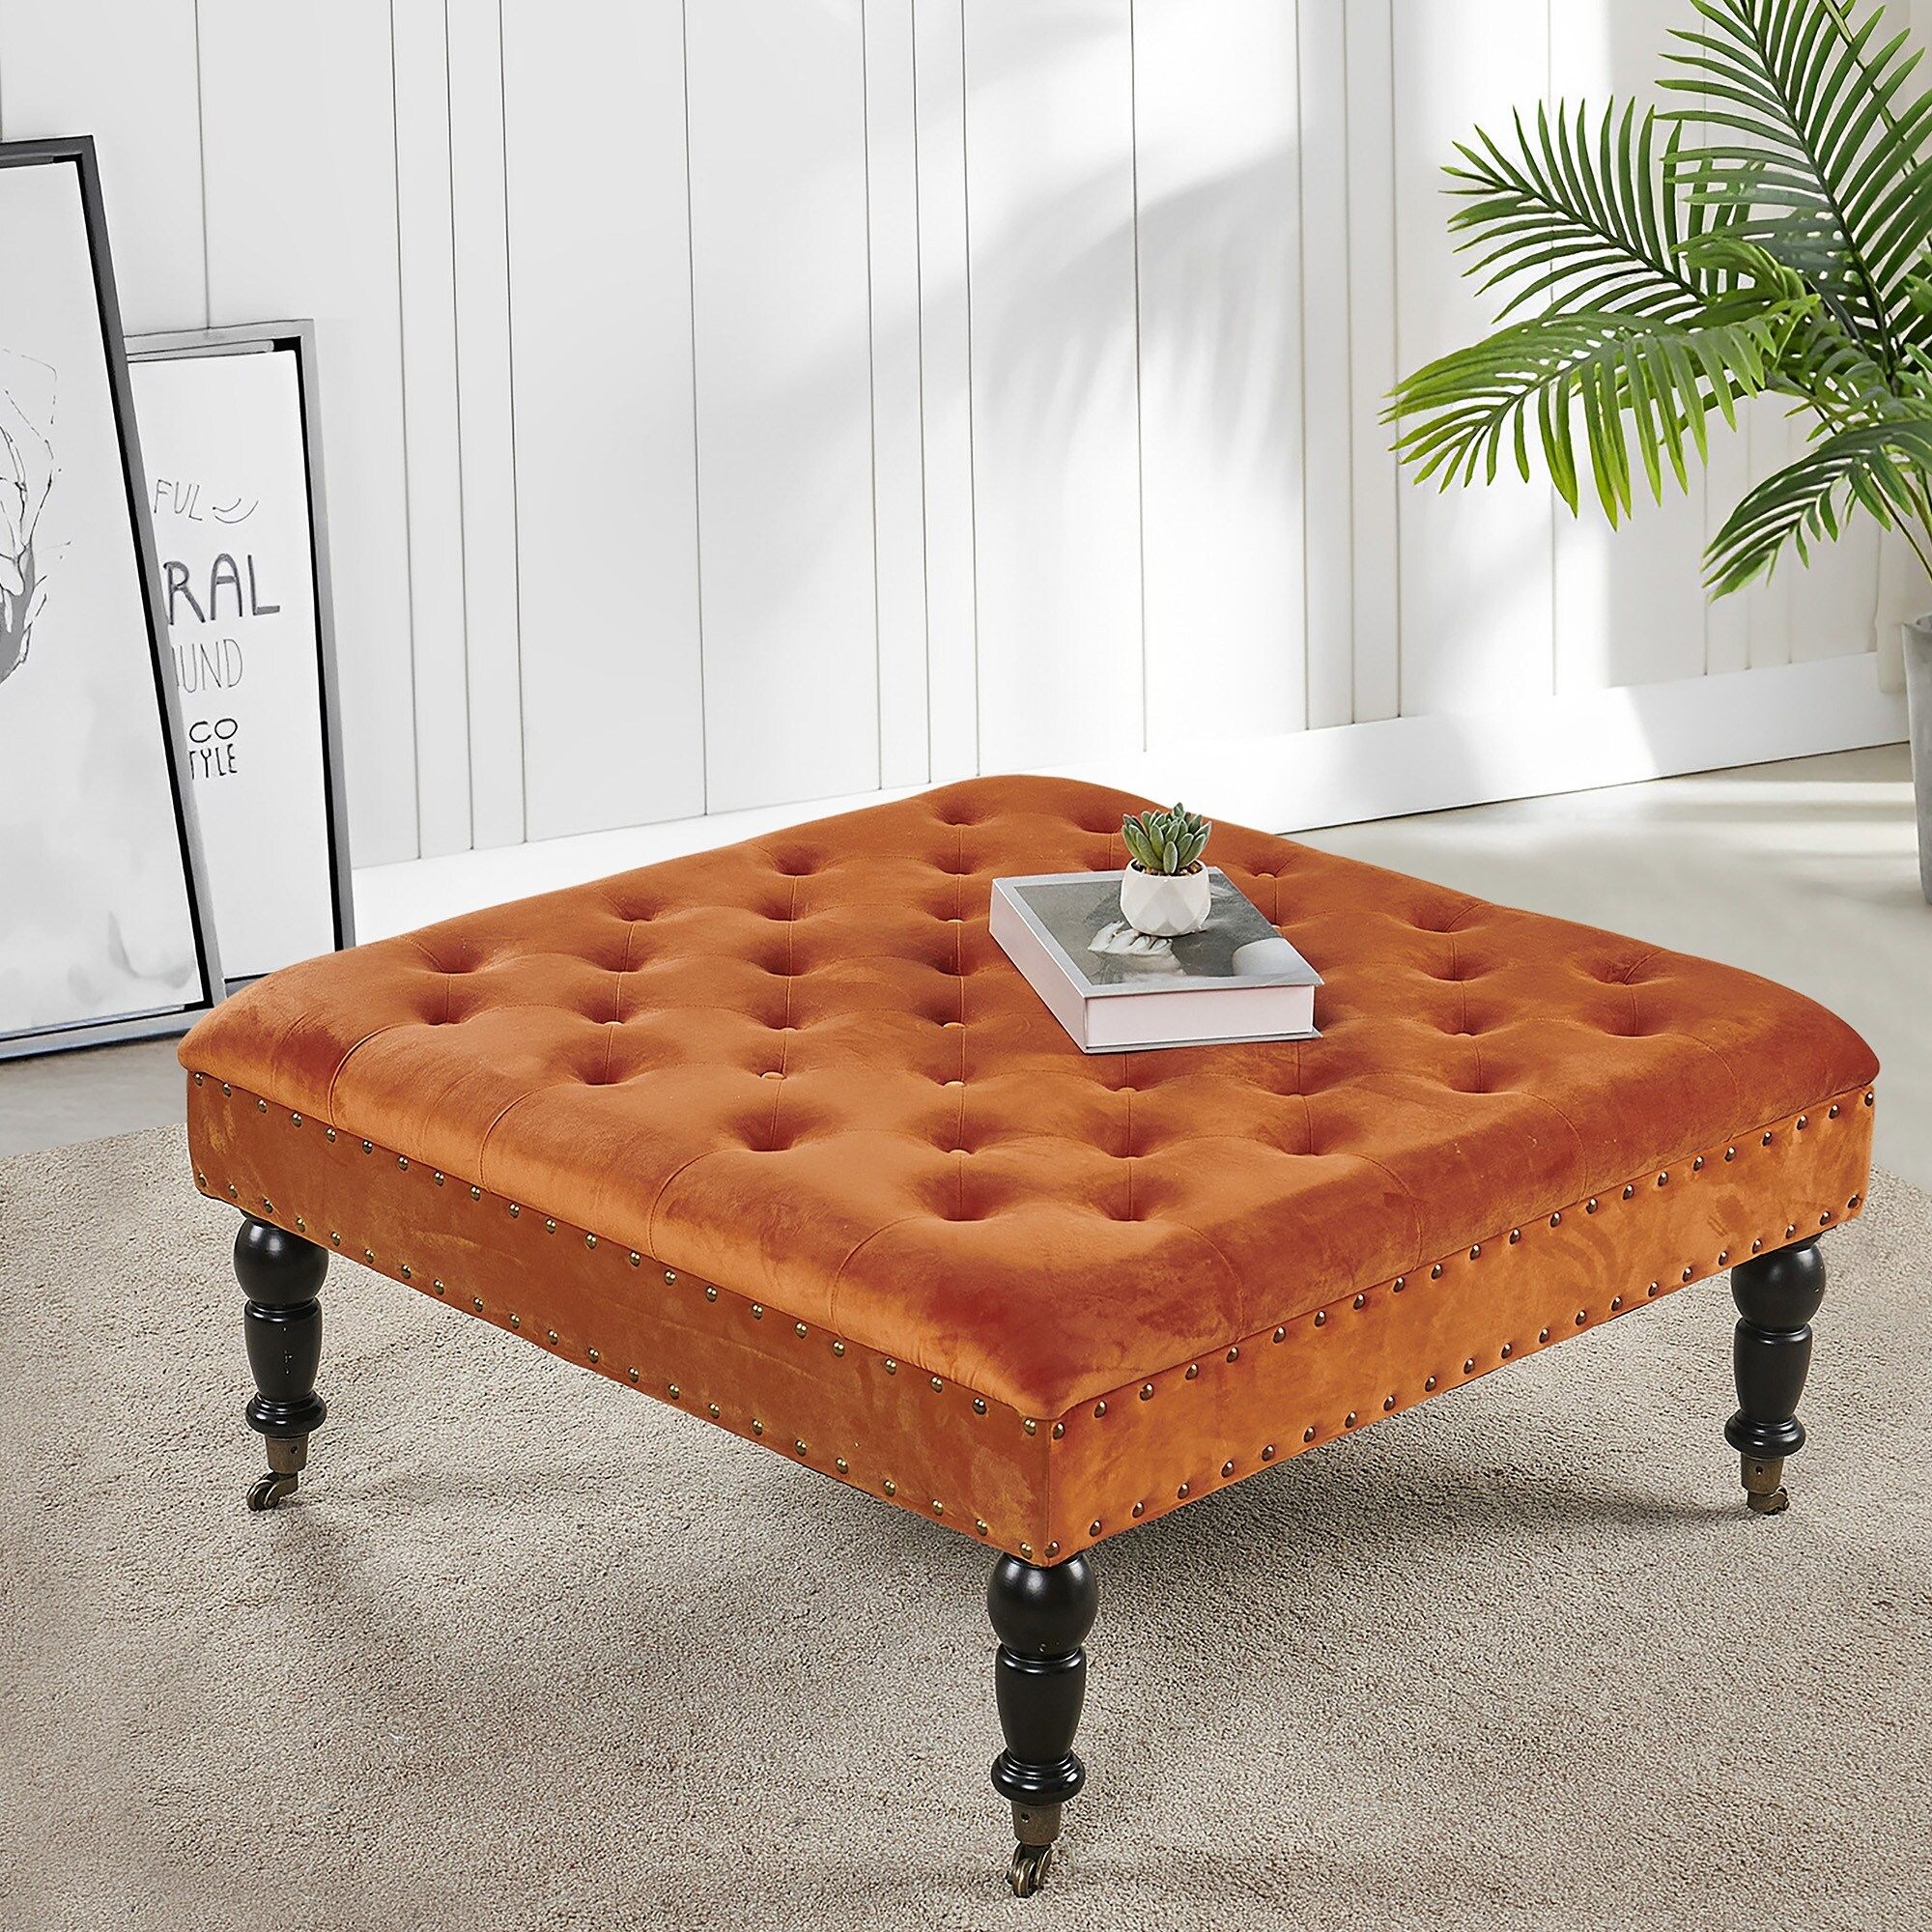 Choosing the Perfect Button Tufted Coffee
Table for Your Space